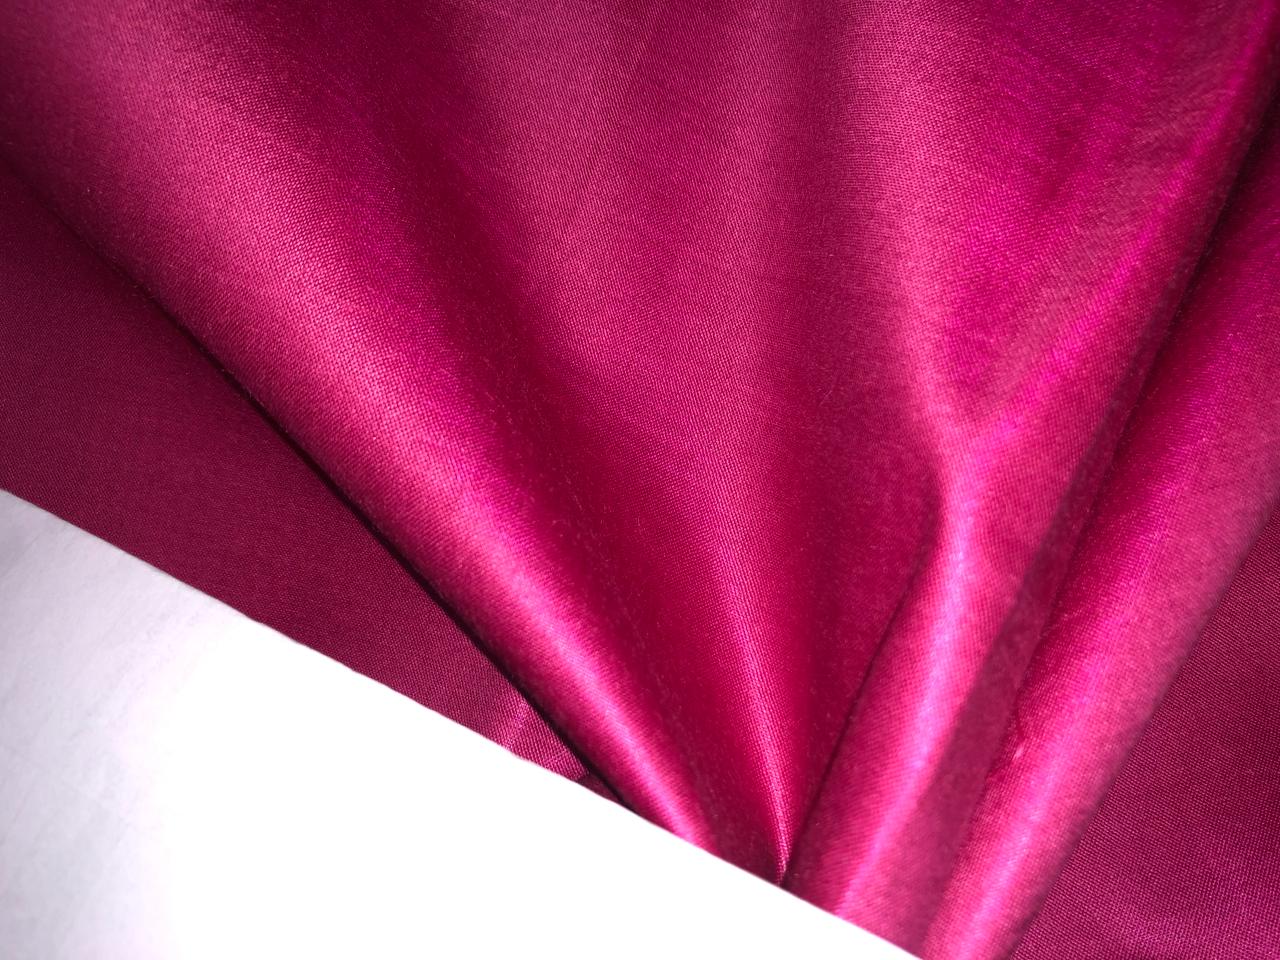 Tussar Silk x Viscose 44" Wide available in 2 shades of pink [15830/29]